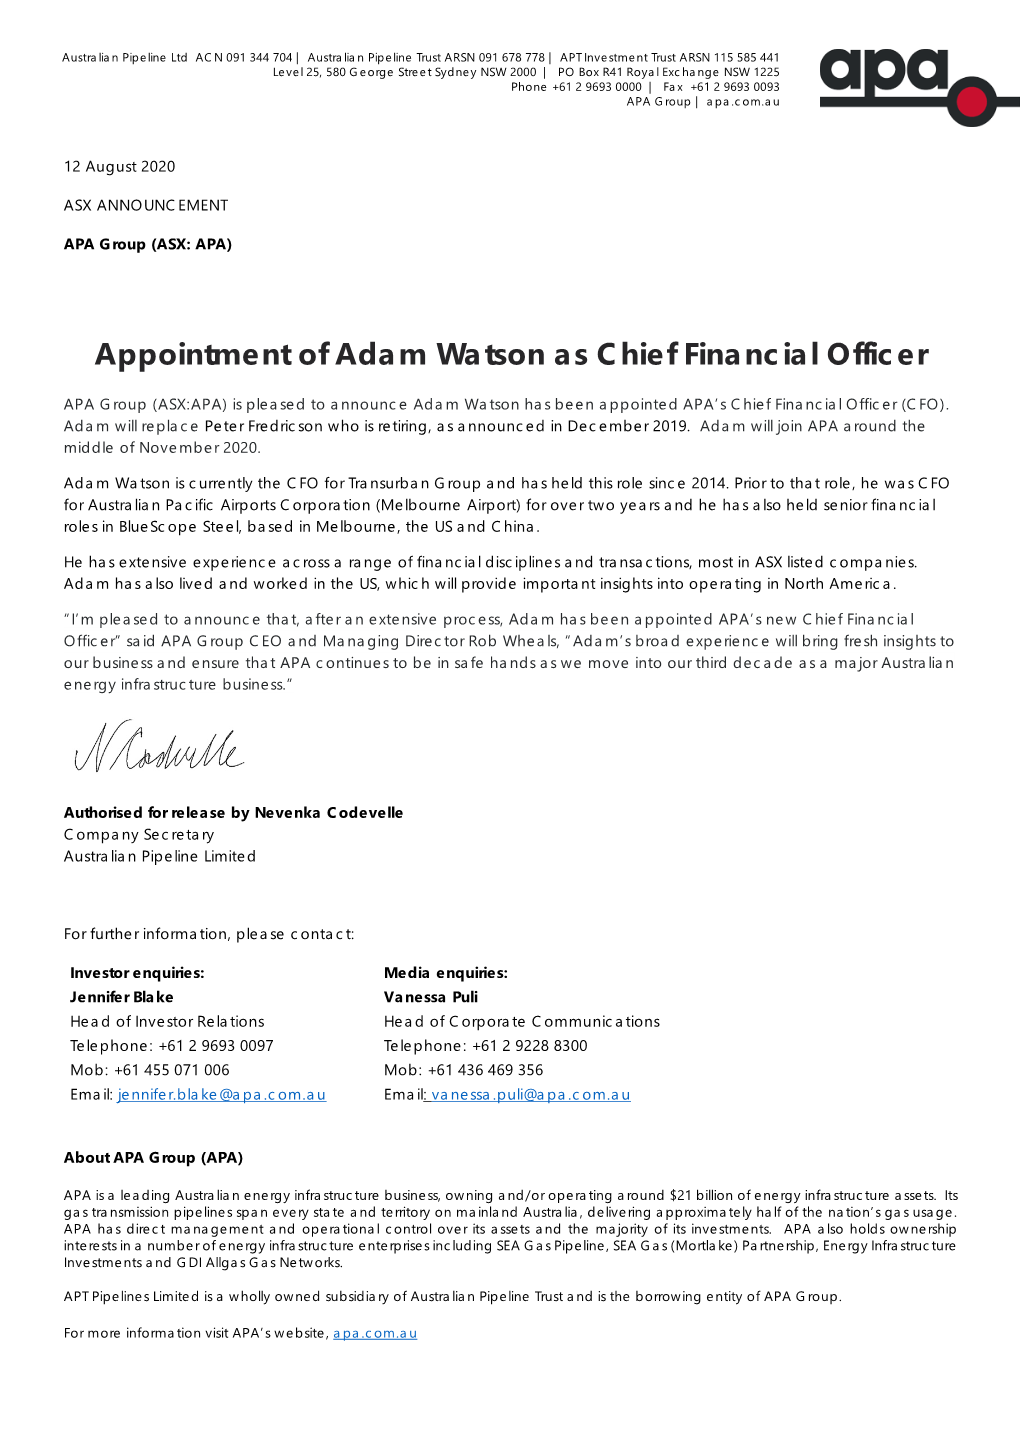 Appointment of Adam Watson As Chief Financial Officer